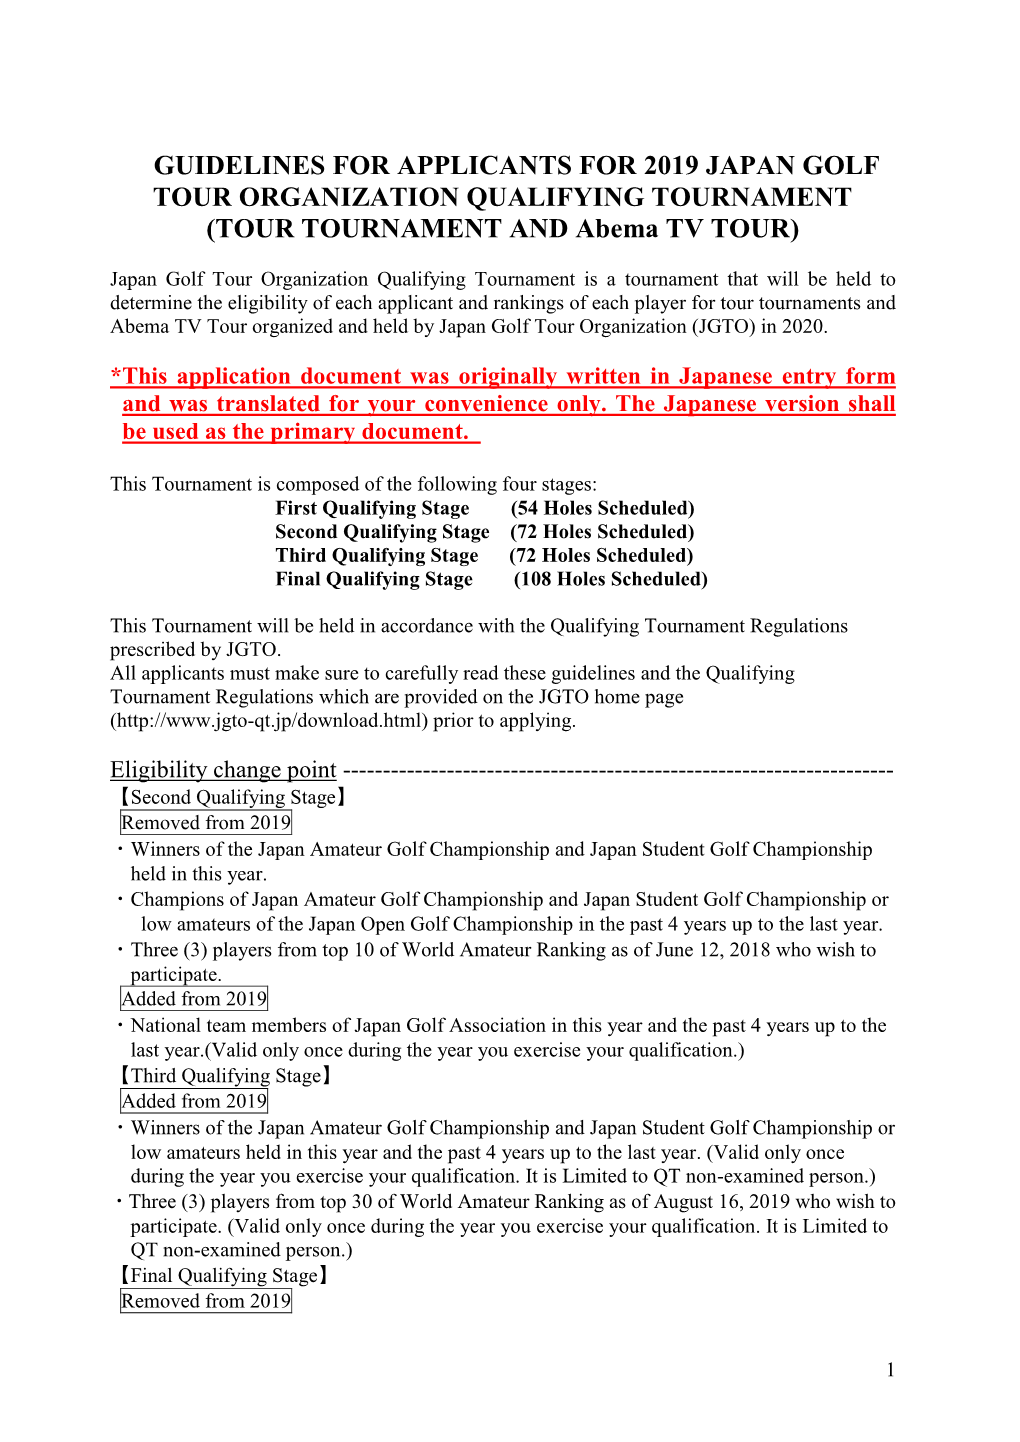 GUIDELINES for APPLICANTS for 2019 JAPAN GOLF TOUR ORGANIZATION QUALIFYING TOURNAMENT (TOUR TOURNAMENT and Abema TV TOUR)